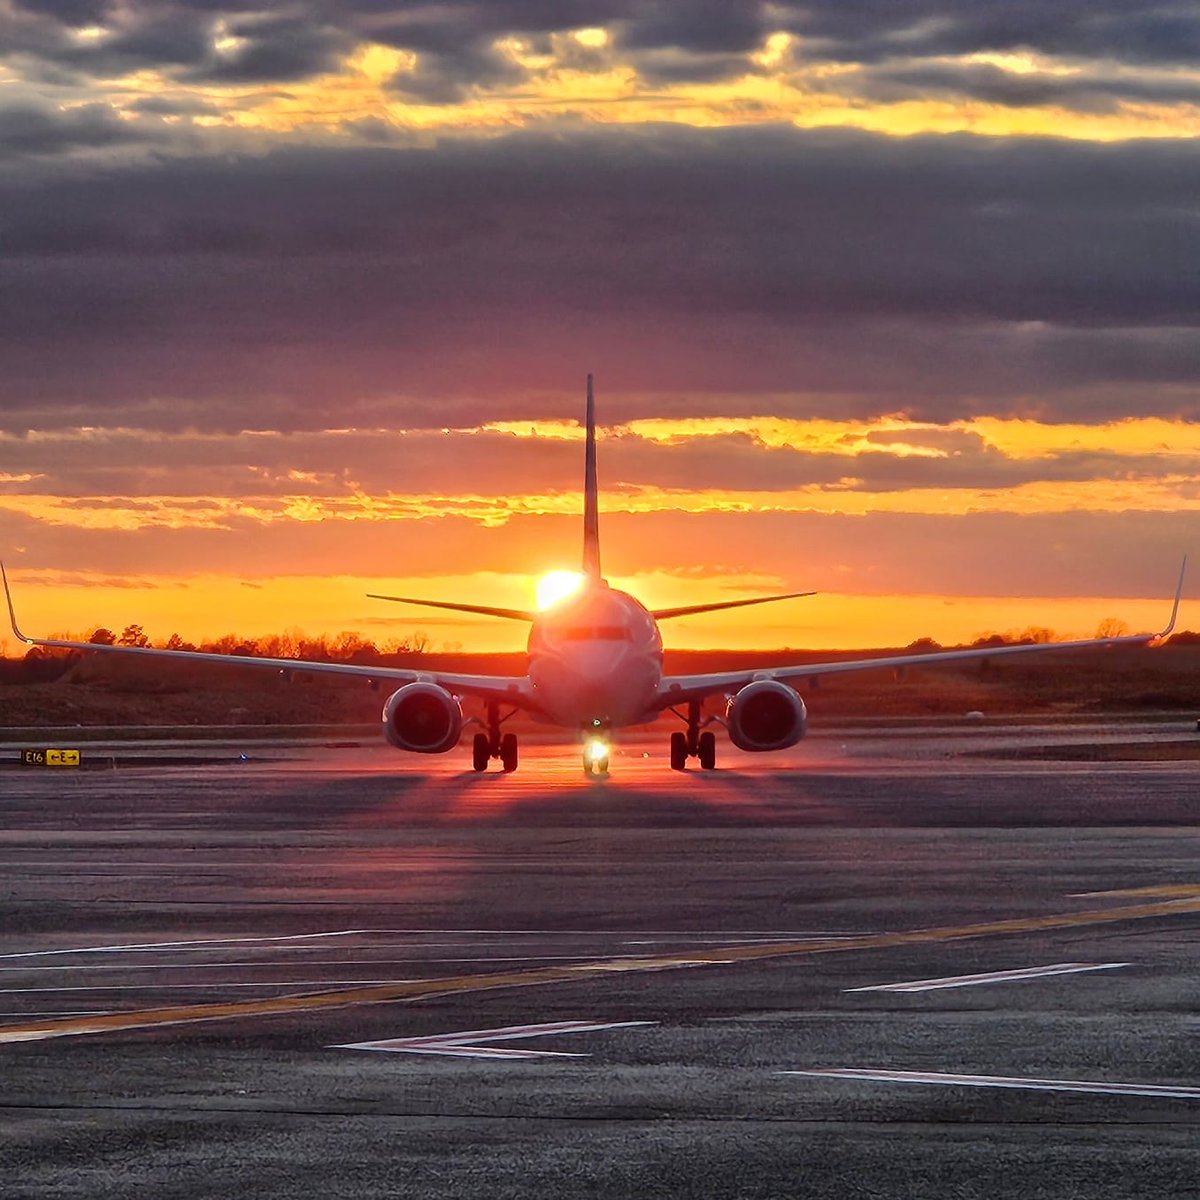 Chasing sunsets at #CLTairport. 📸 by @t_revzz